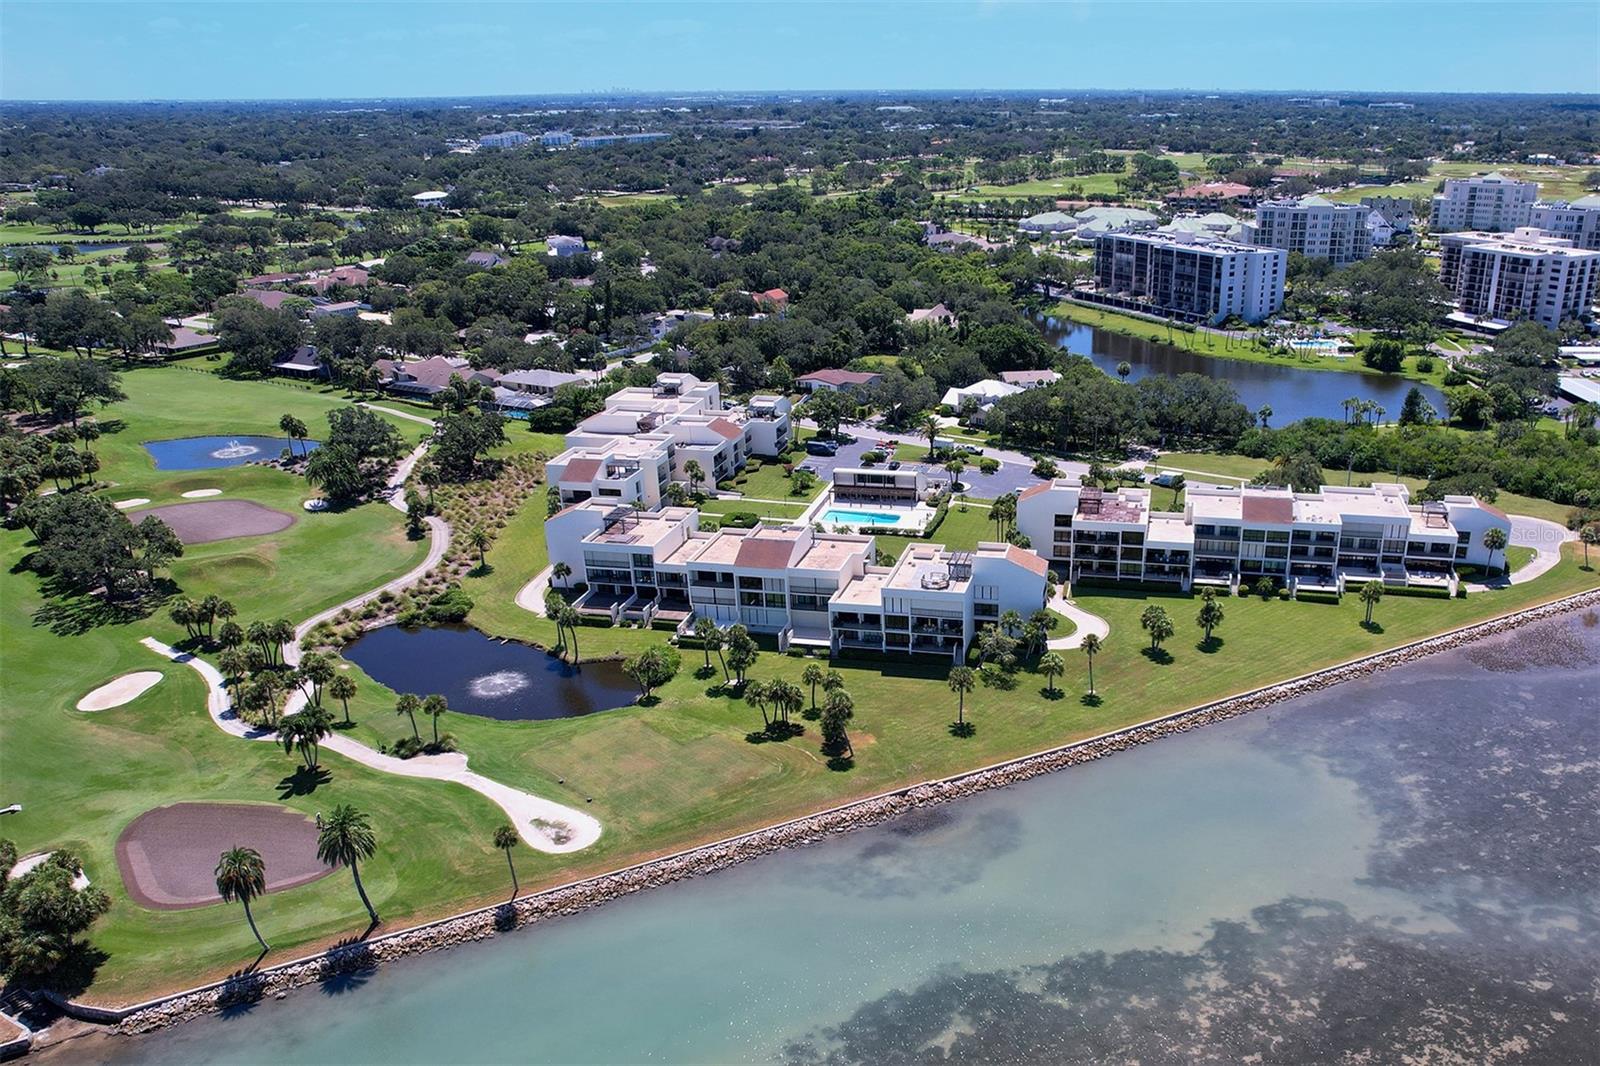 Aerial view of Building 2 in the middle on the golf course and waterfront (Building 1 to the right and Building 3 behind Building 2)